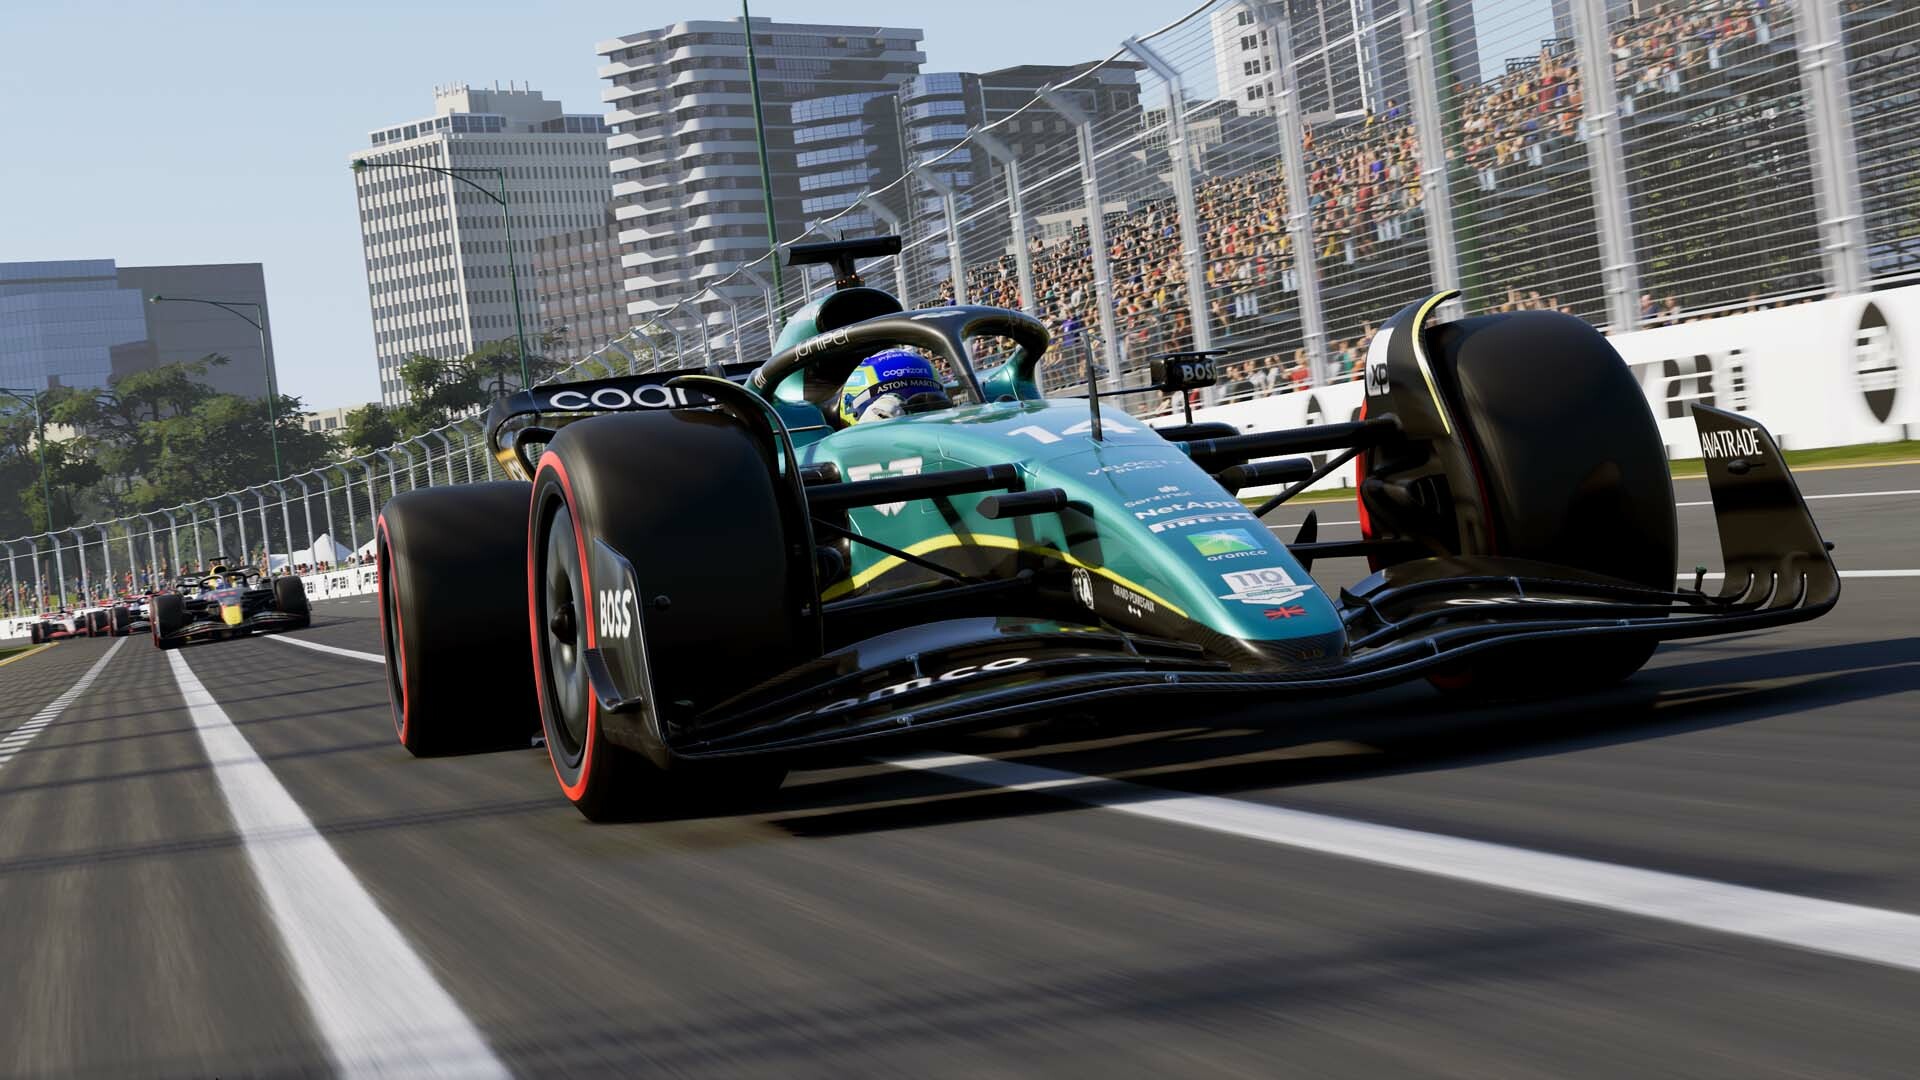 F1 23 PlayStation 5 Account Pixelpuffin.net Activation Link